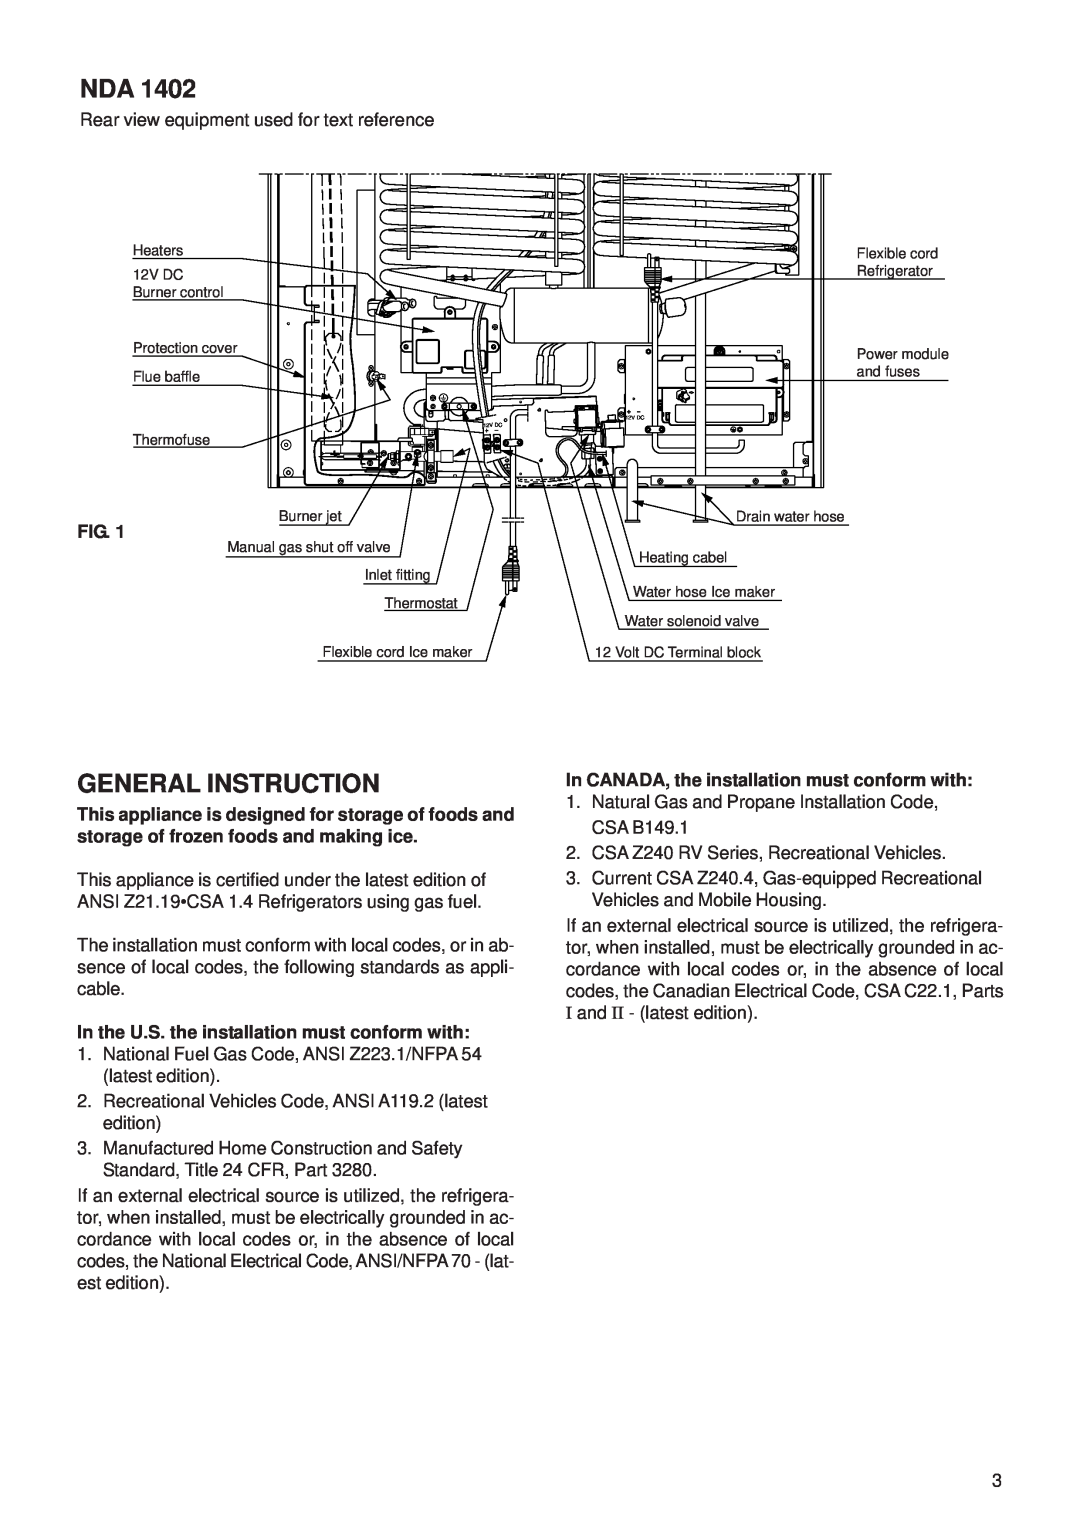 Dometic NDA1402 manual General Instruction, In the U.S. the installation must conform with 